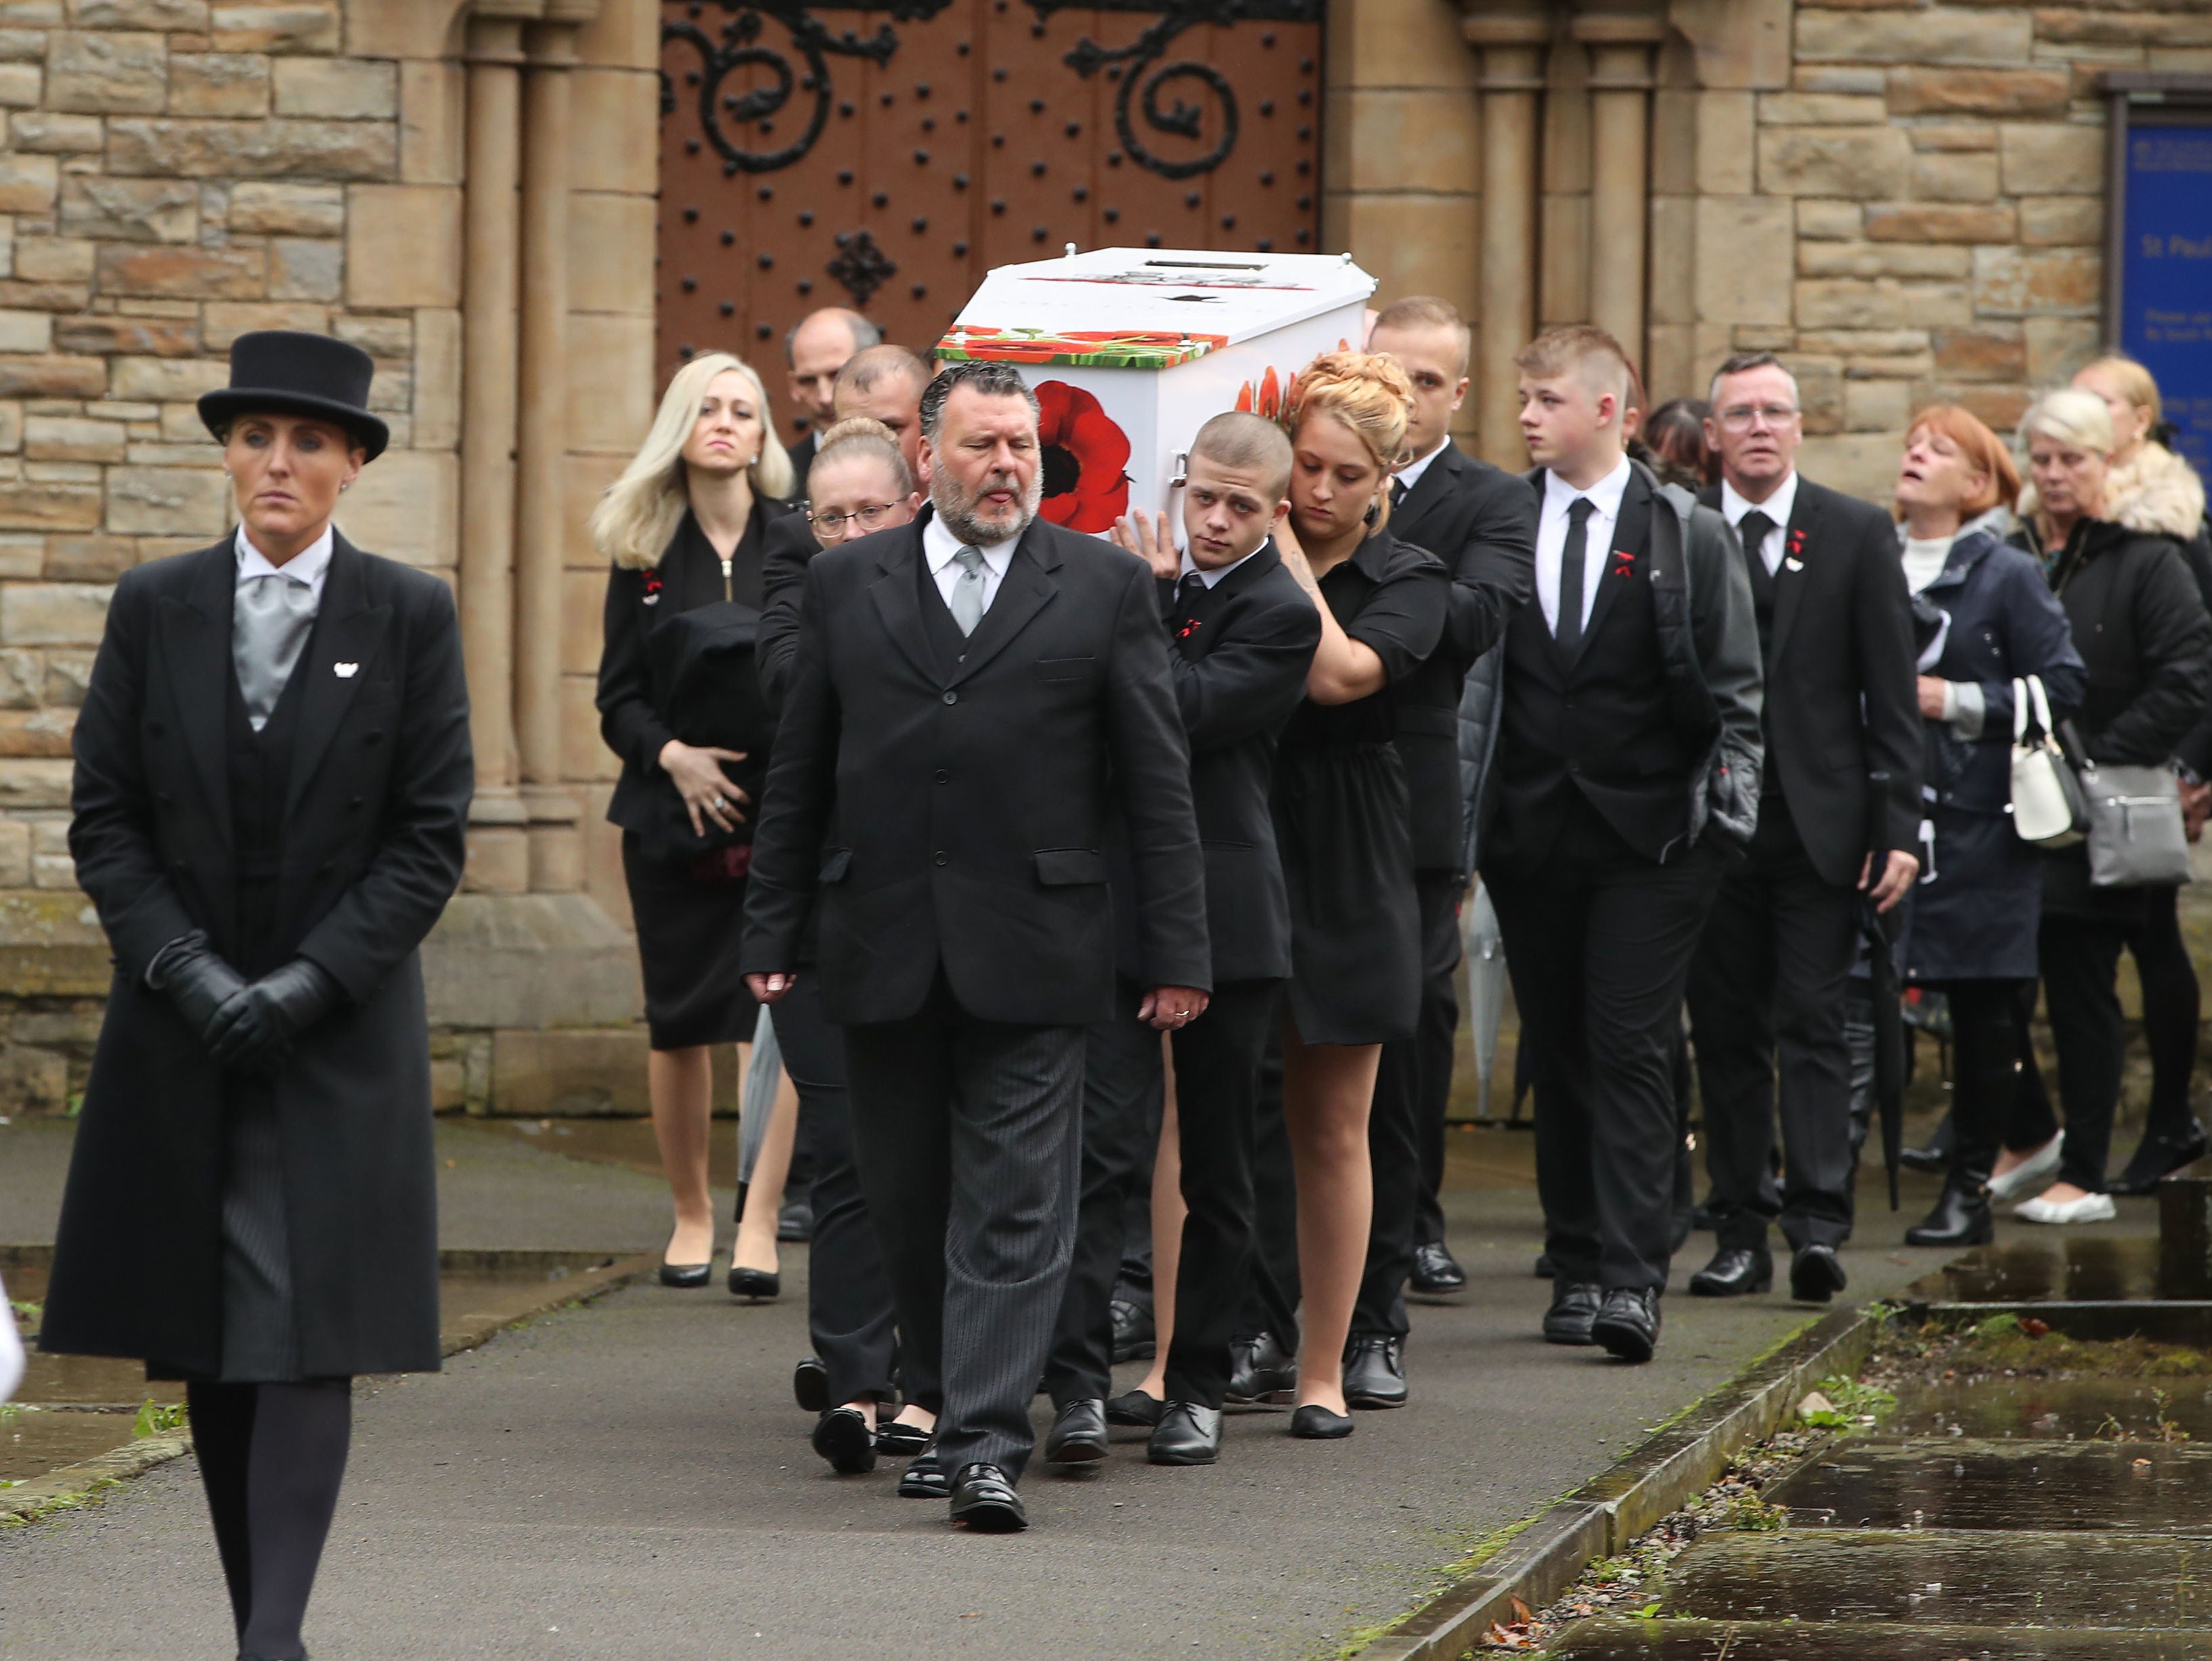 The coffin of Michelle Pearson is carried out of St Paul’s Church in Walkden, Salford, after her funeral